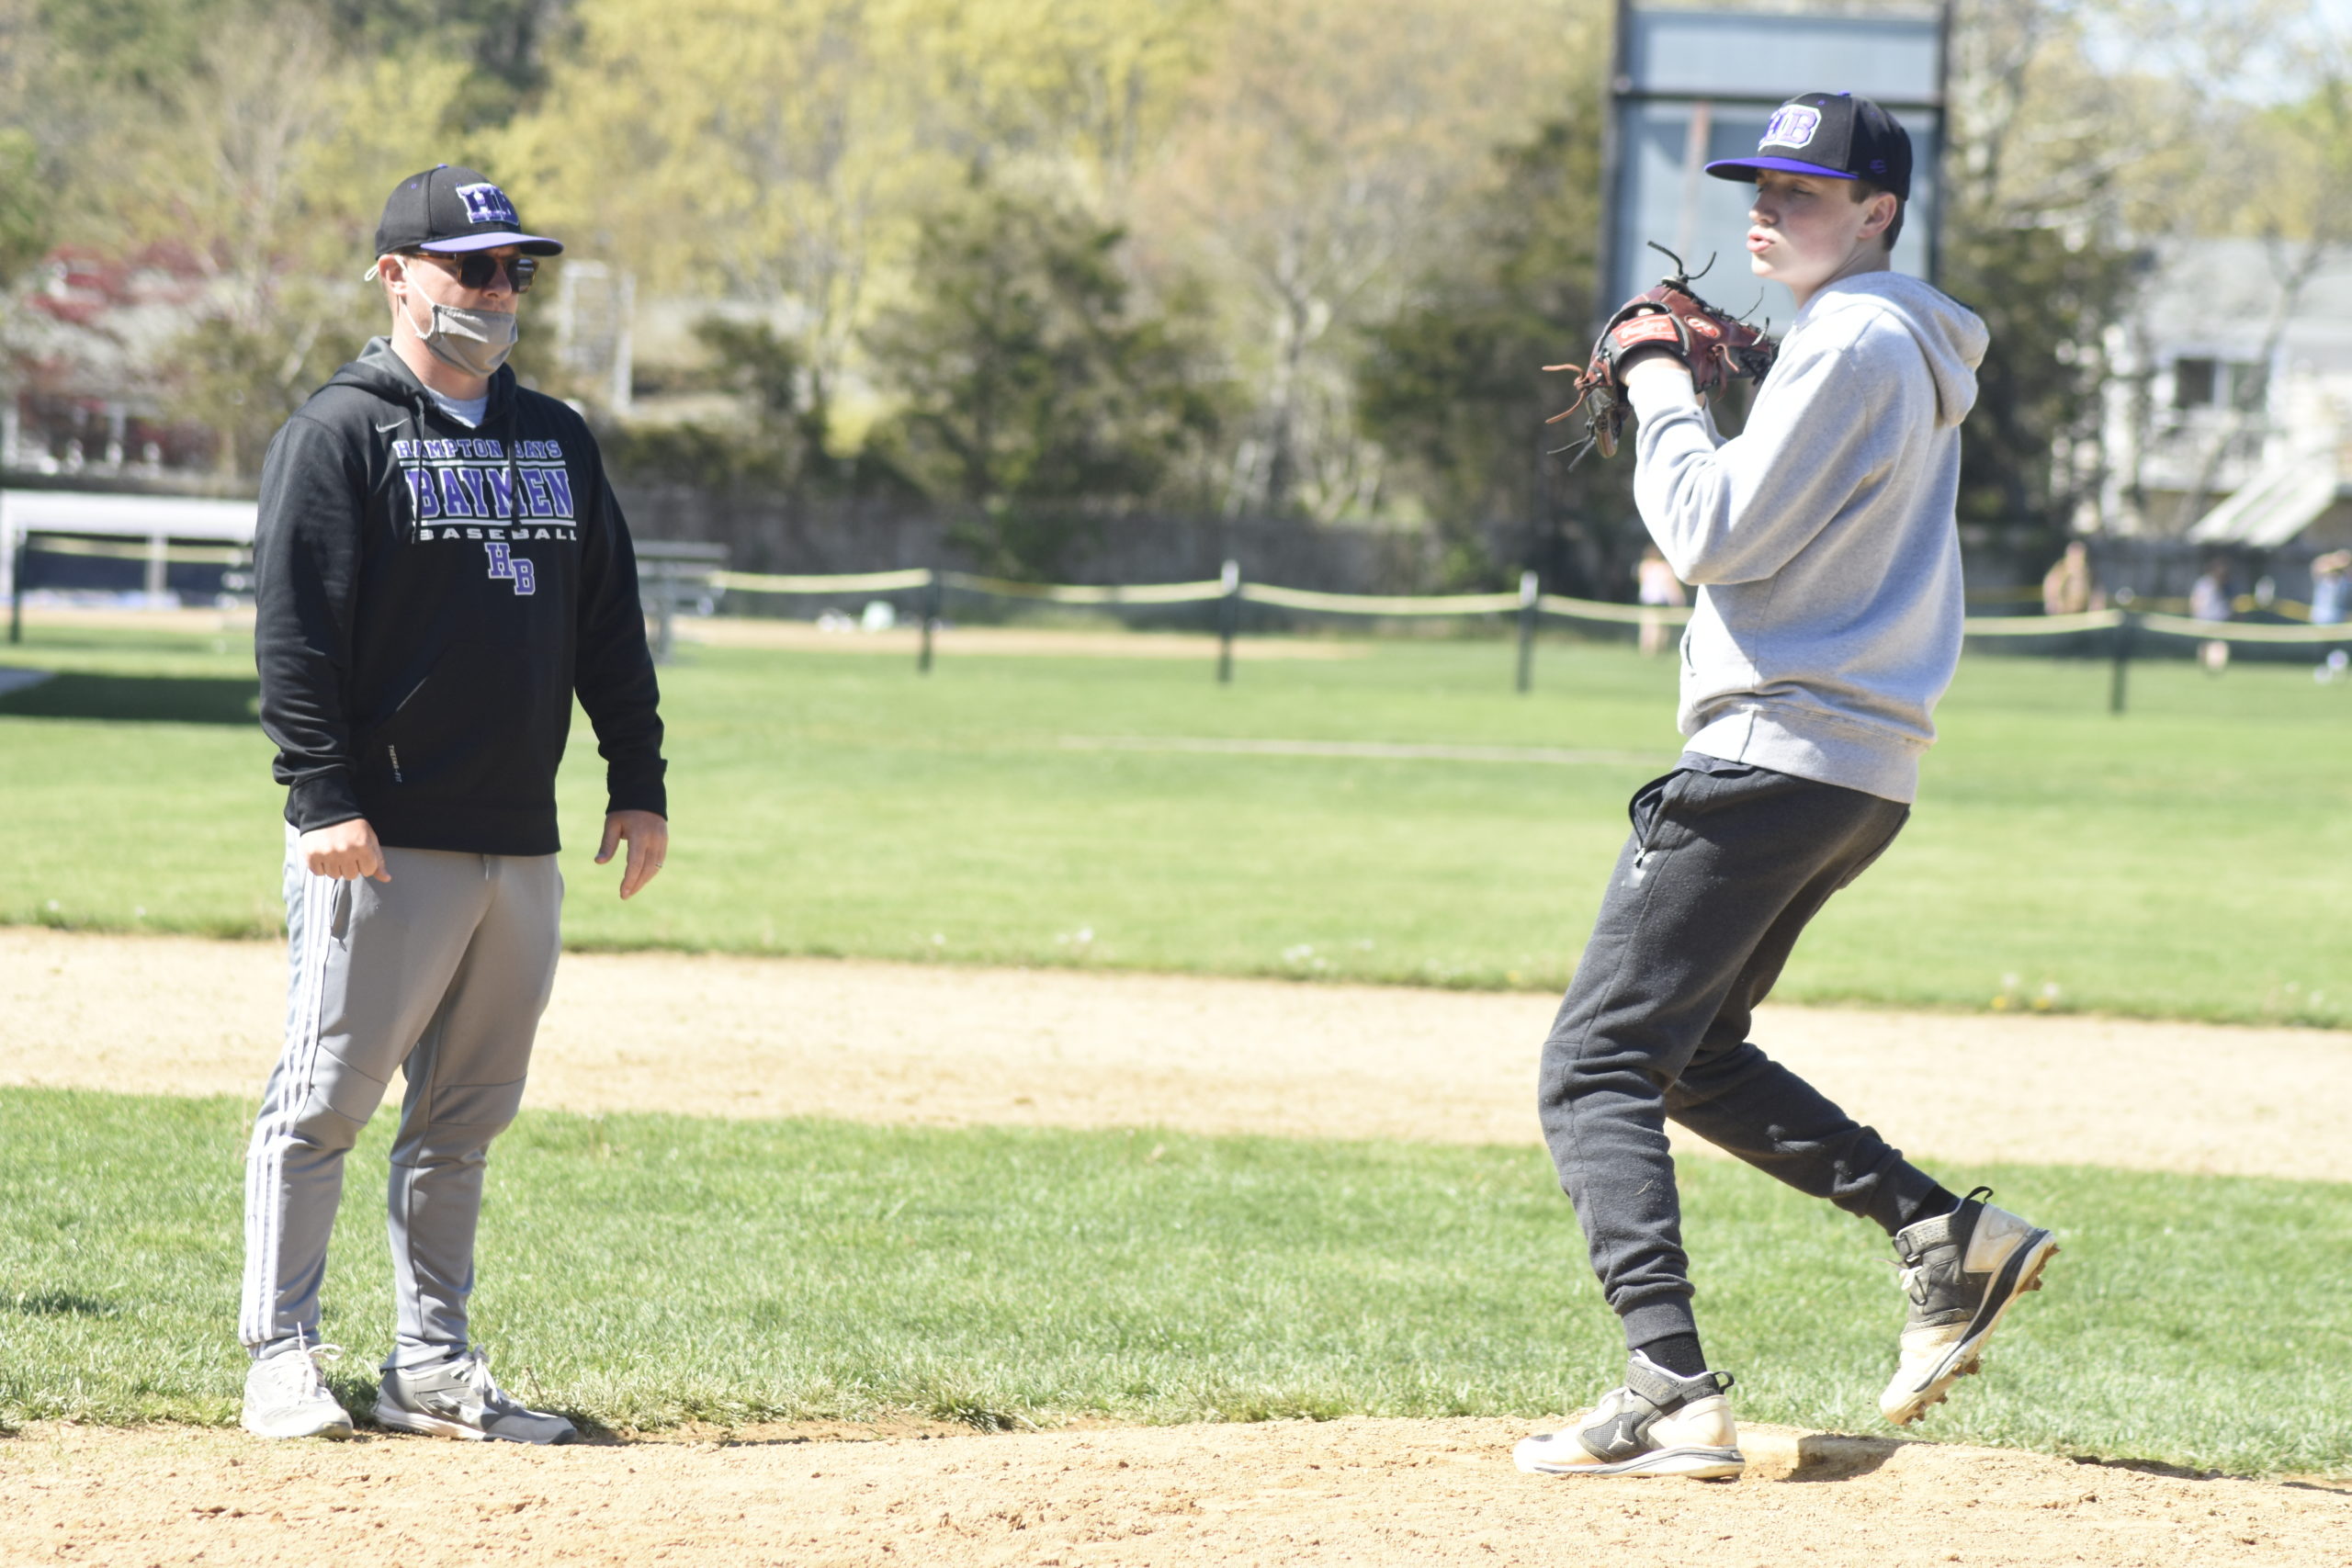 Hampton Bays head coach John Foster going over pick-off moves with his pitcher in practice on Thursday, May 6.